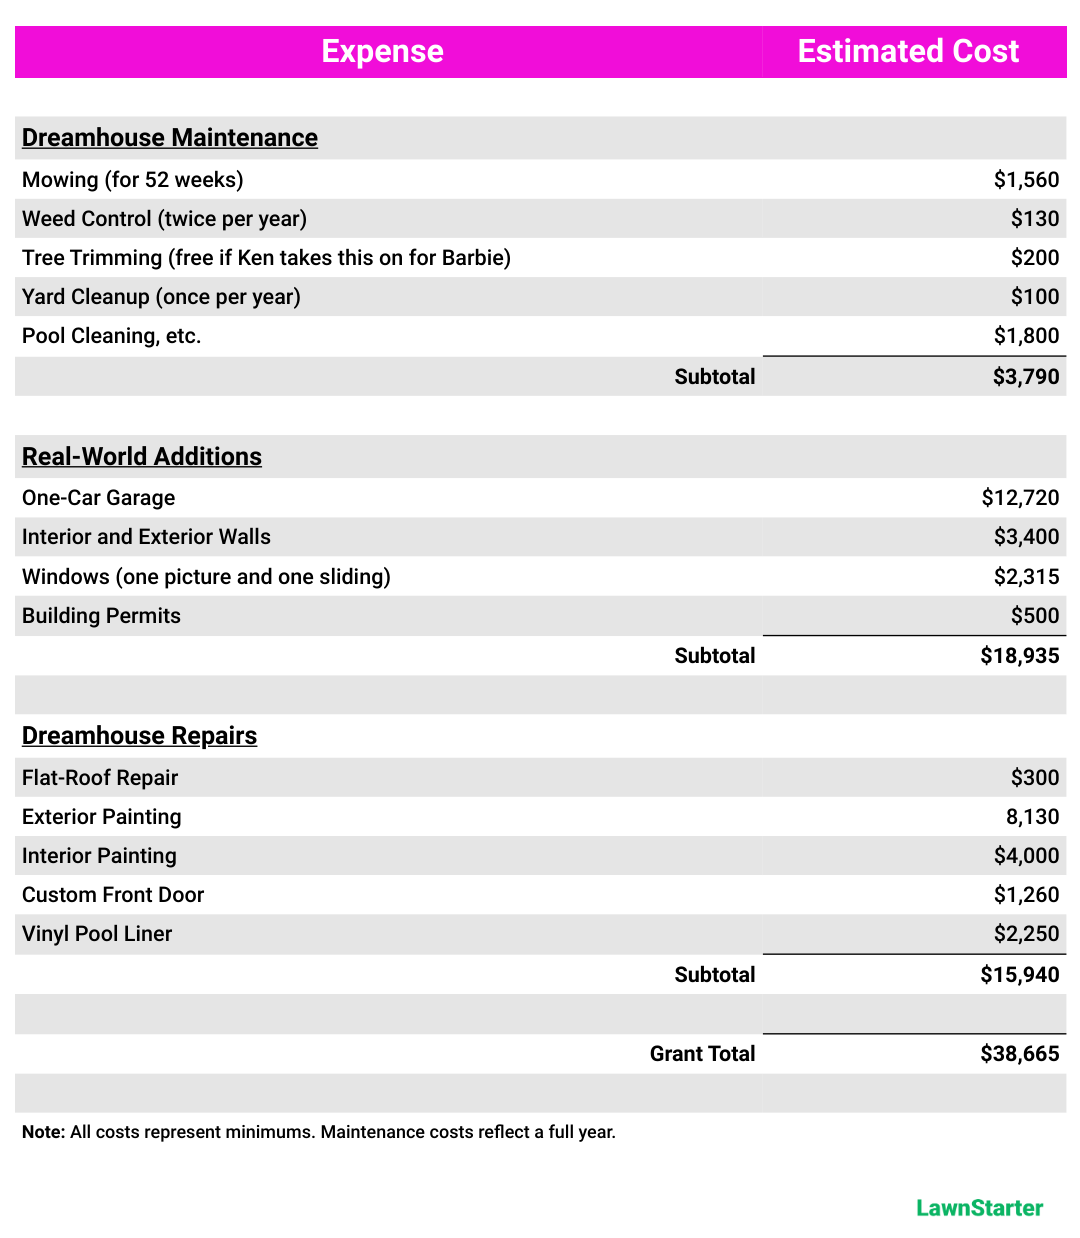 A table of estimated service and cost of renovating Barbie’s Dreamhouse